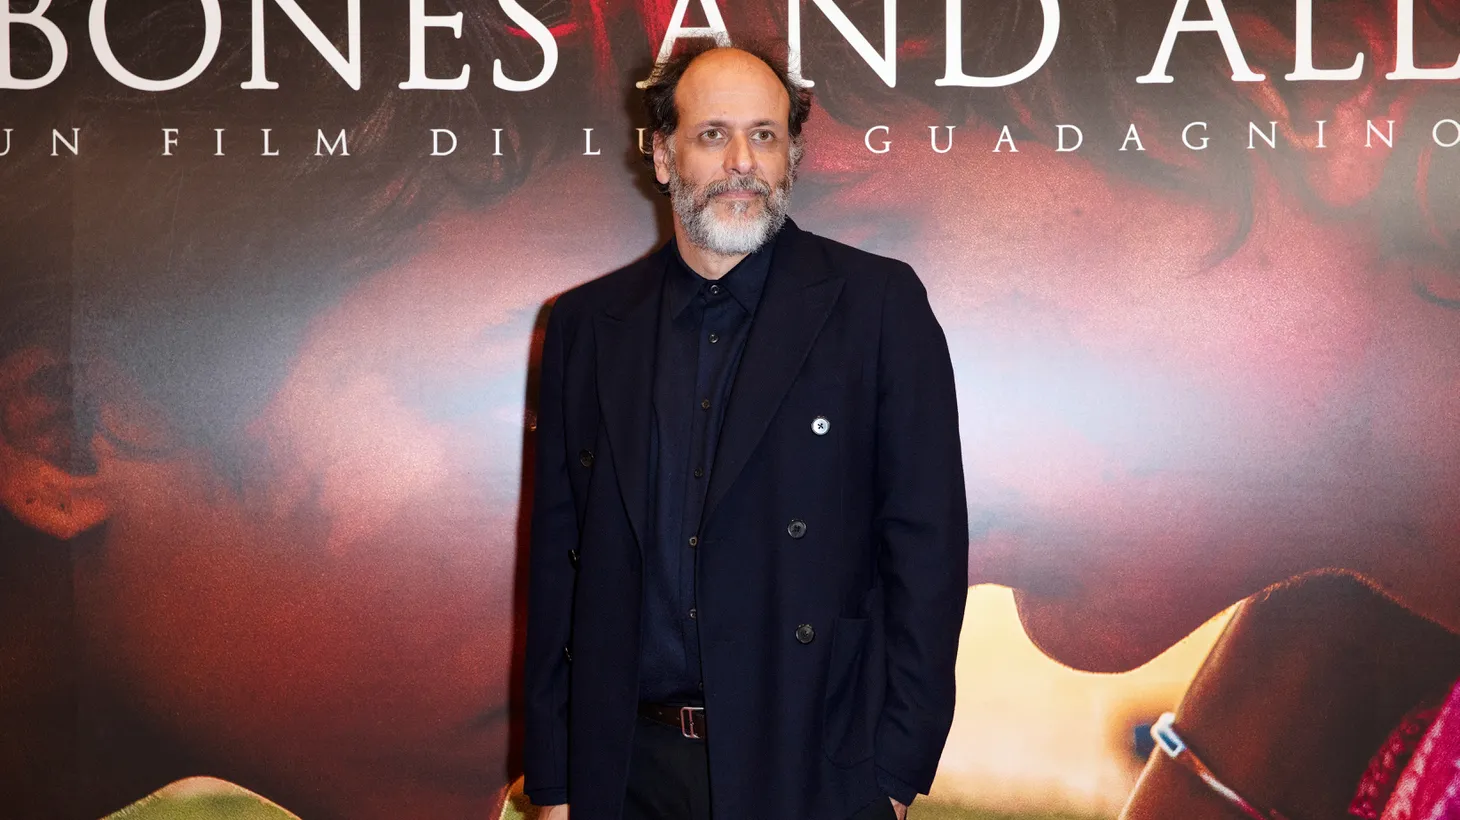 Director Luca Guadagnino attends the photo-call for "Bones and All" in Milan, Italy, on November 12, 2022.